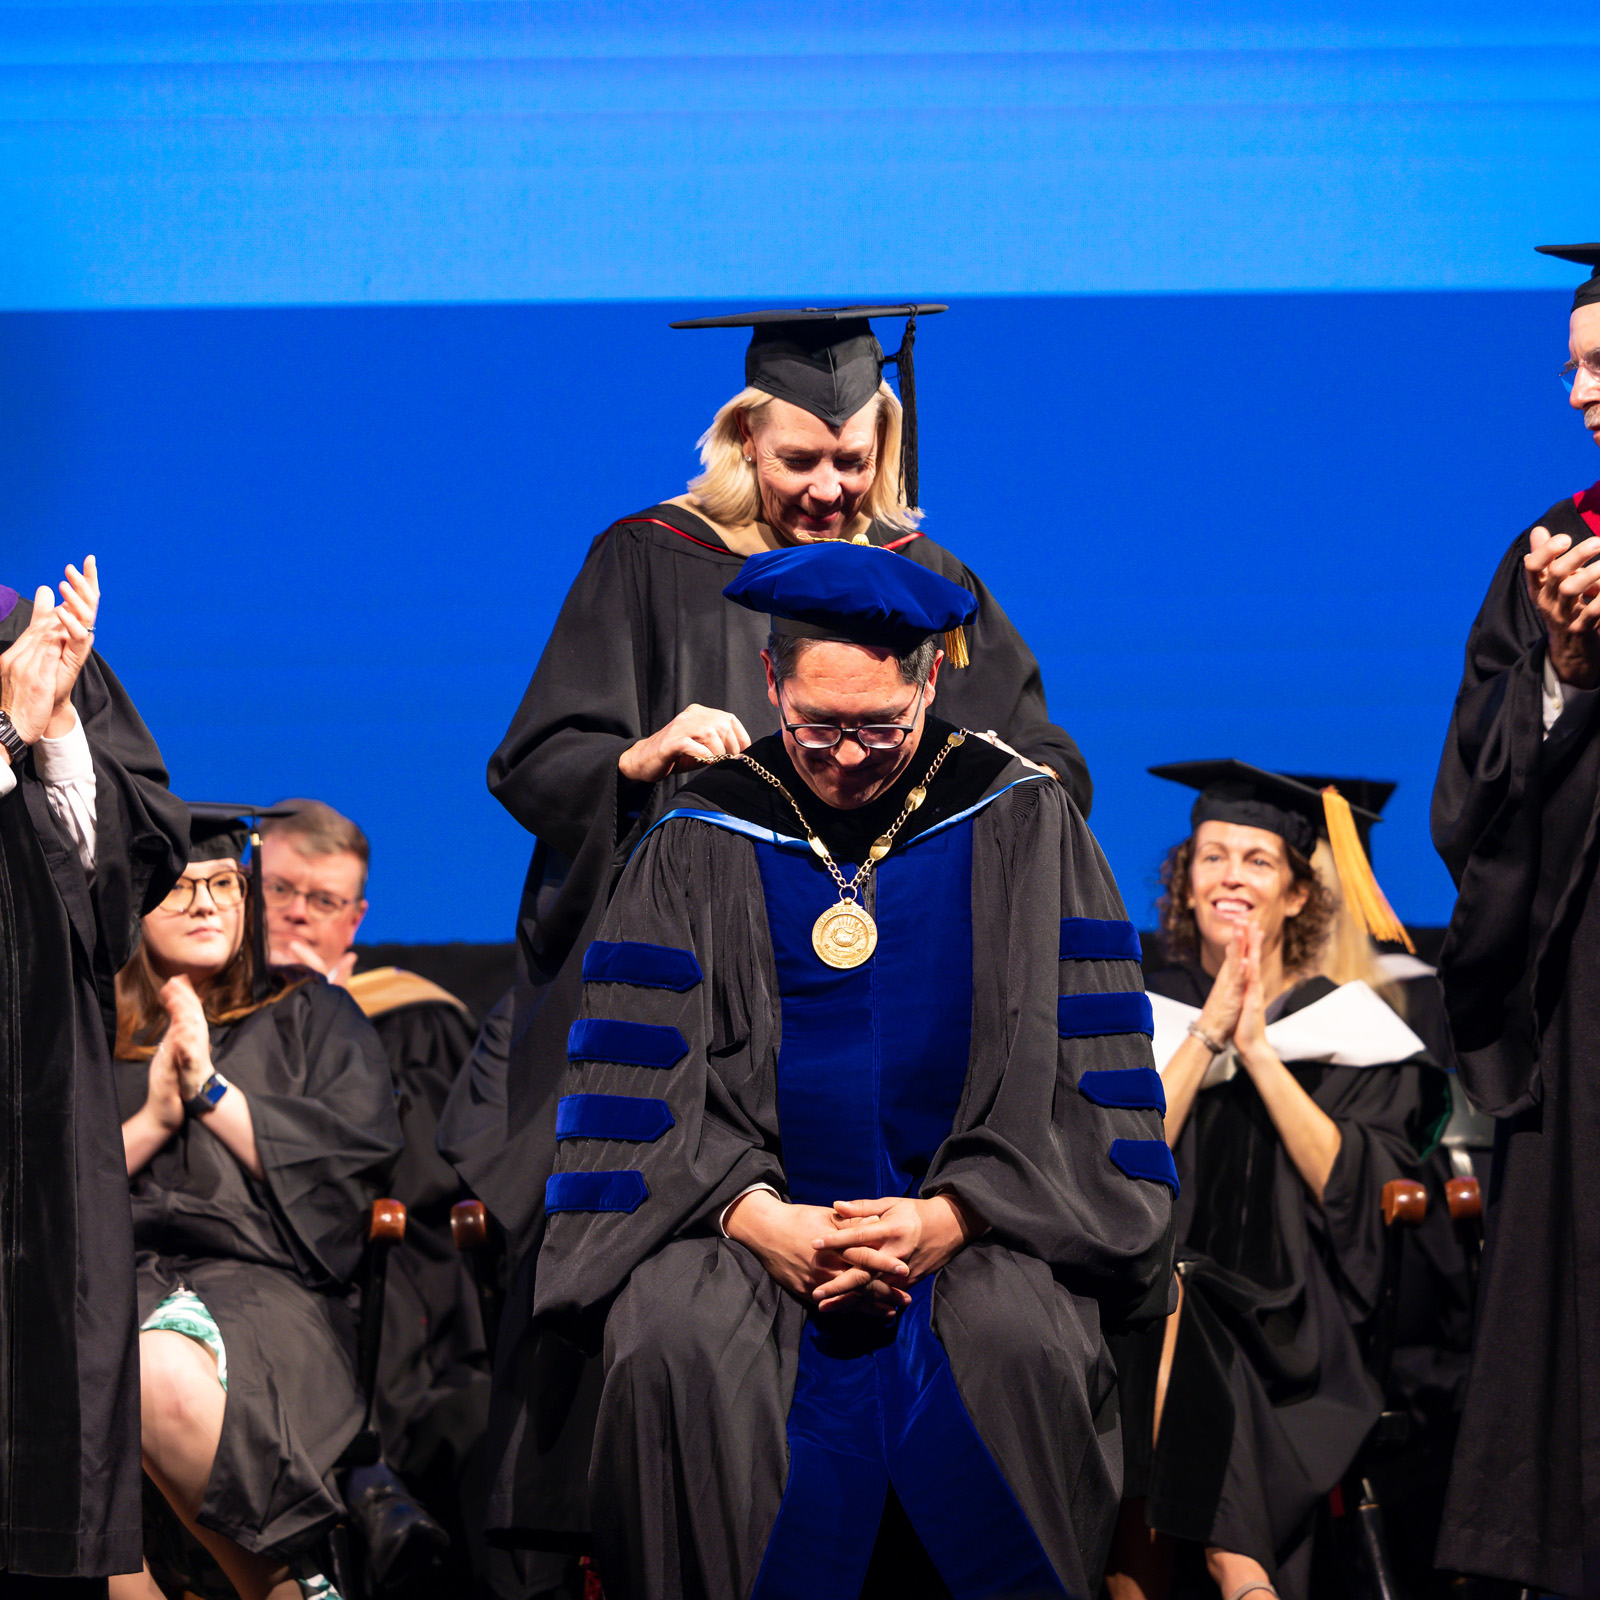 Champlain College's President Alex Hernandez receiving a medal at his inauguration